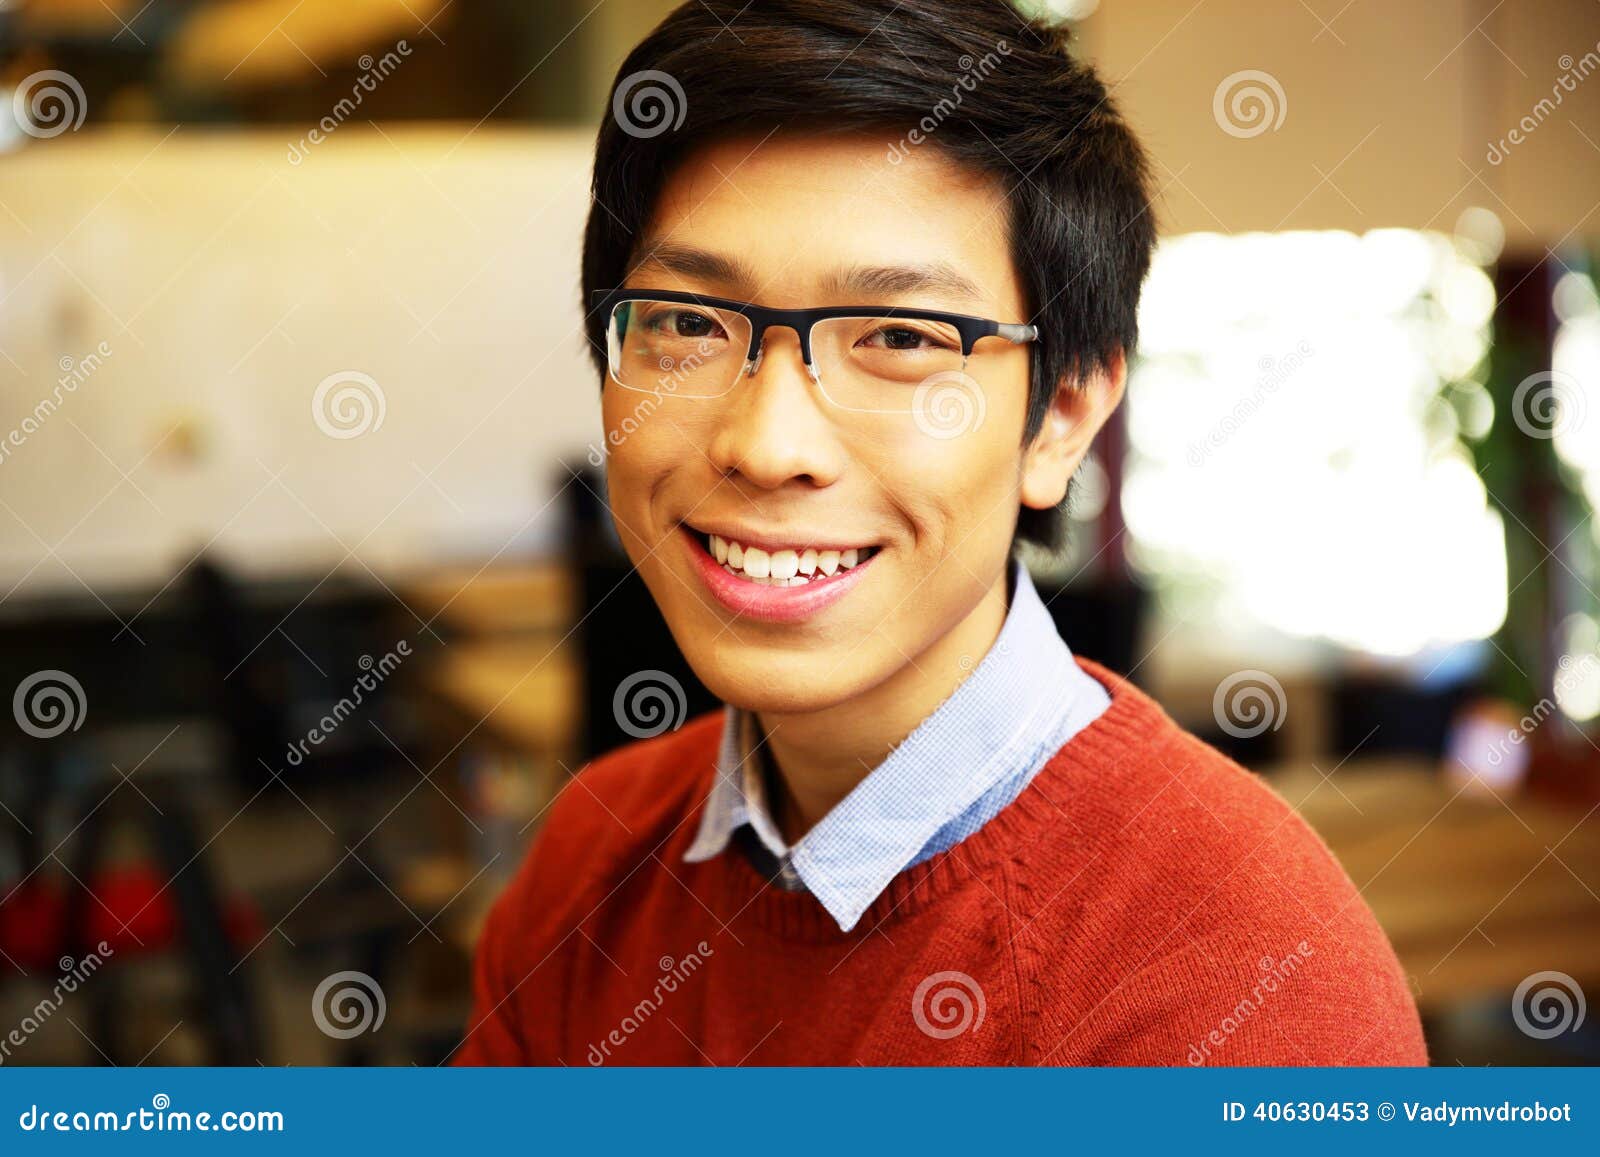 Young Happy Asian Man With Glasses Stock Photo - Image: 40630453